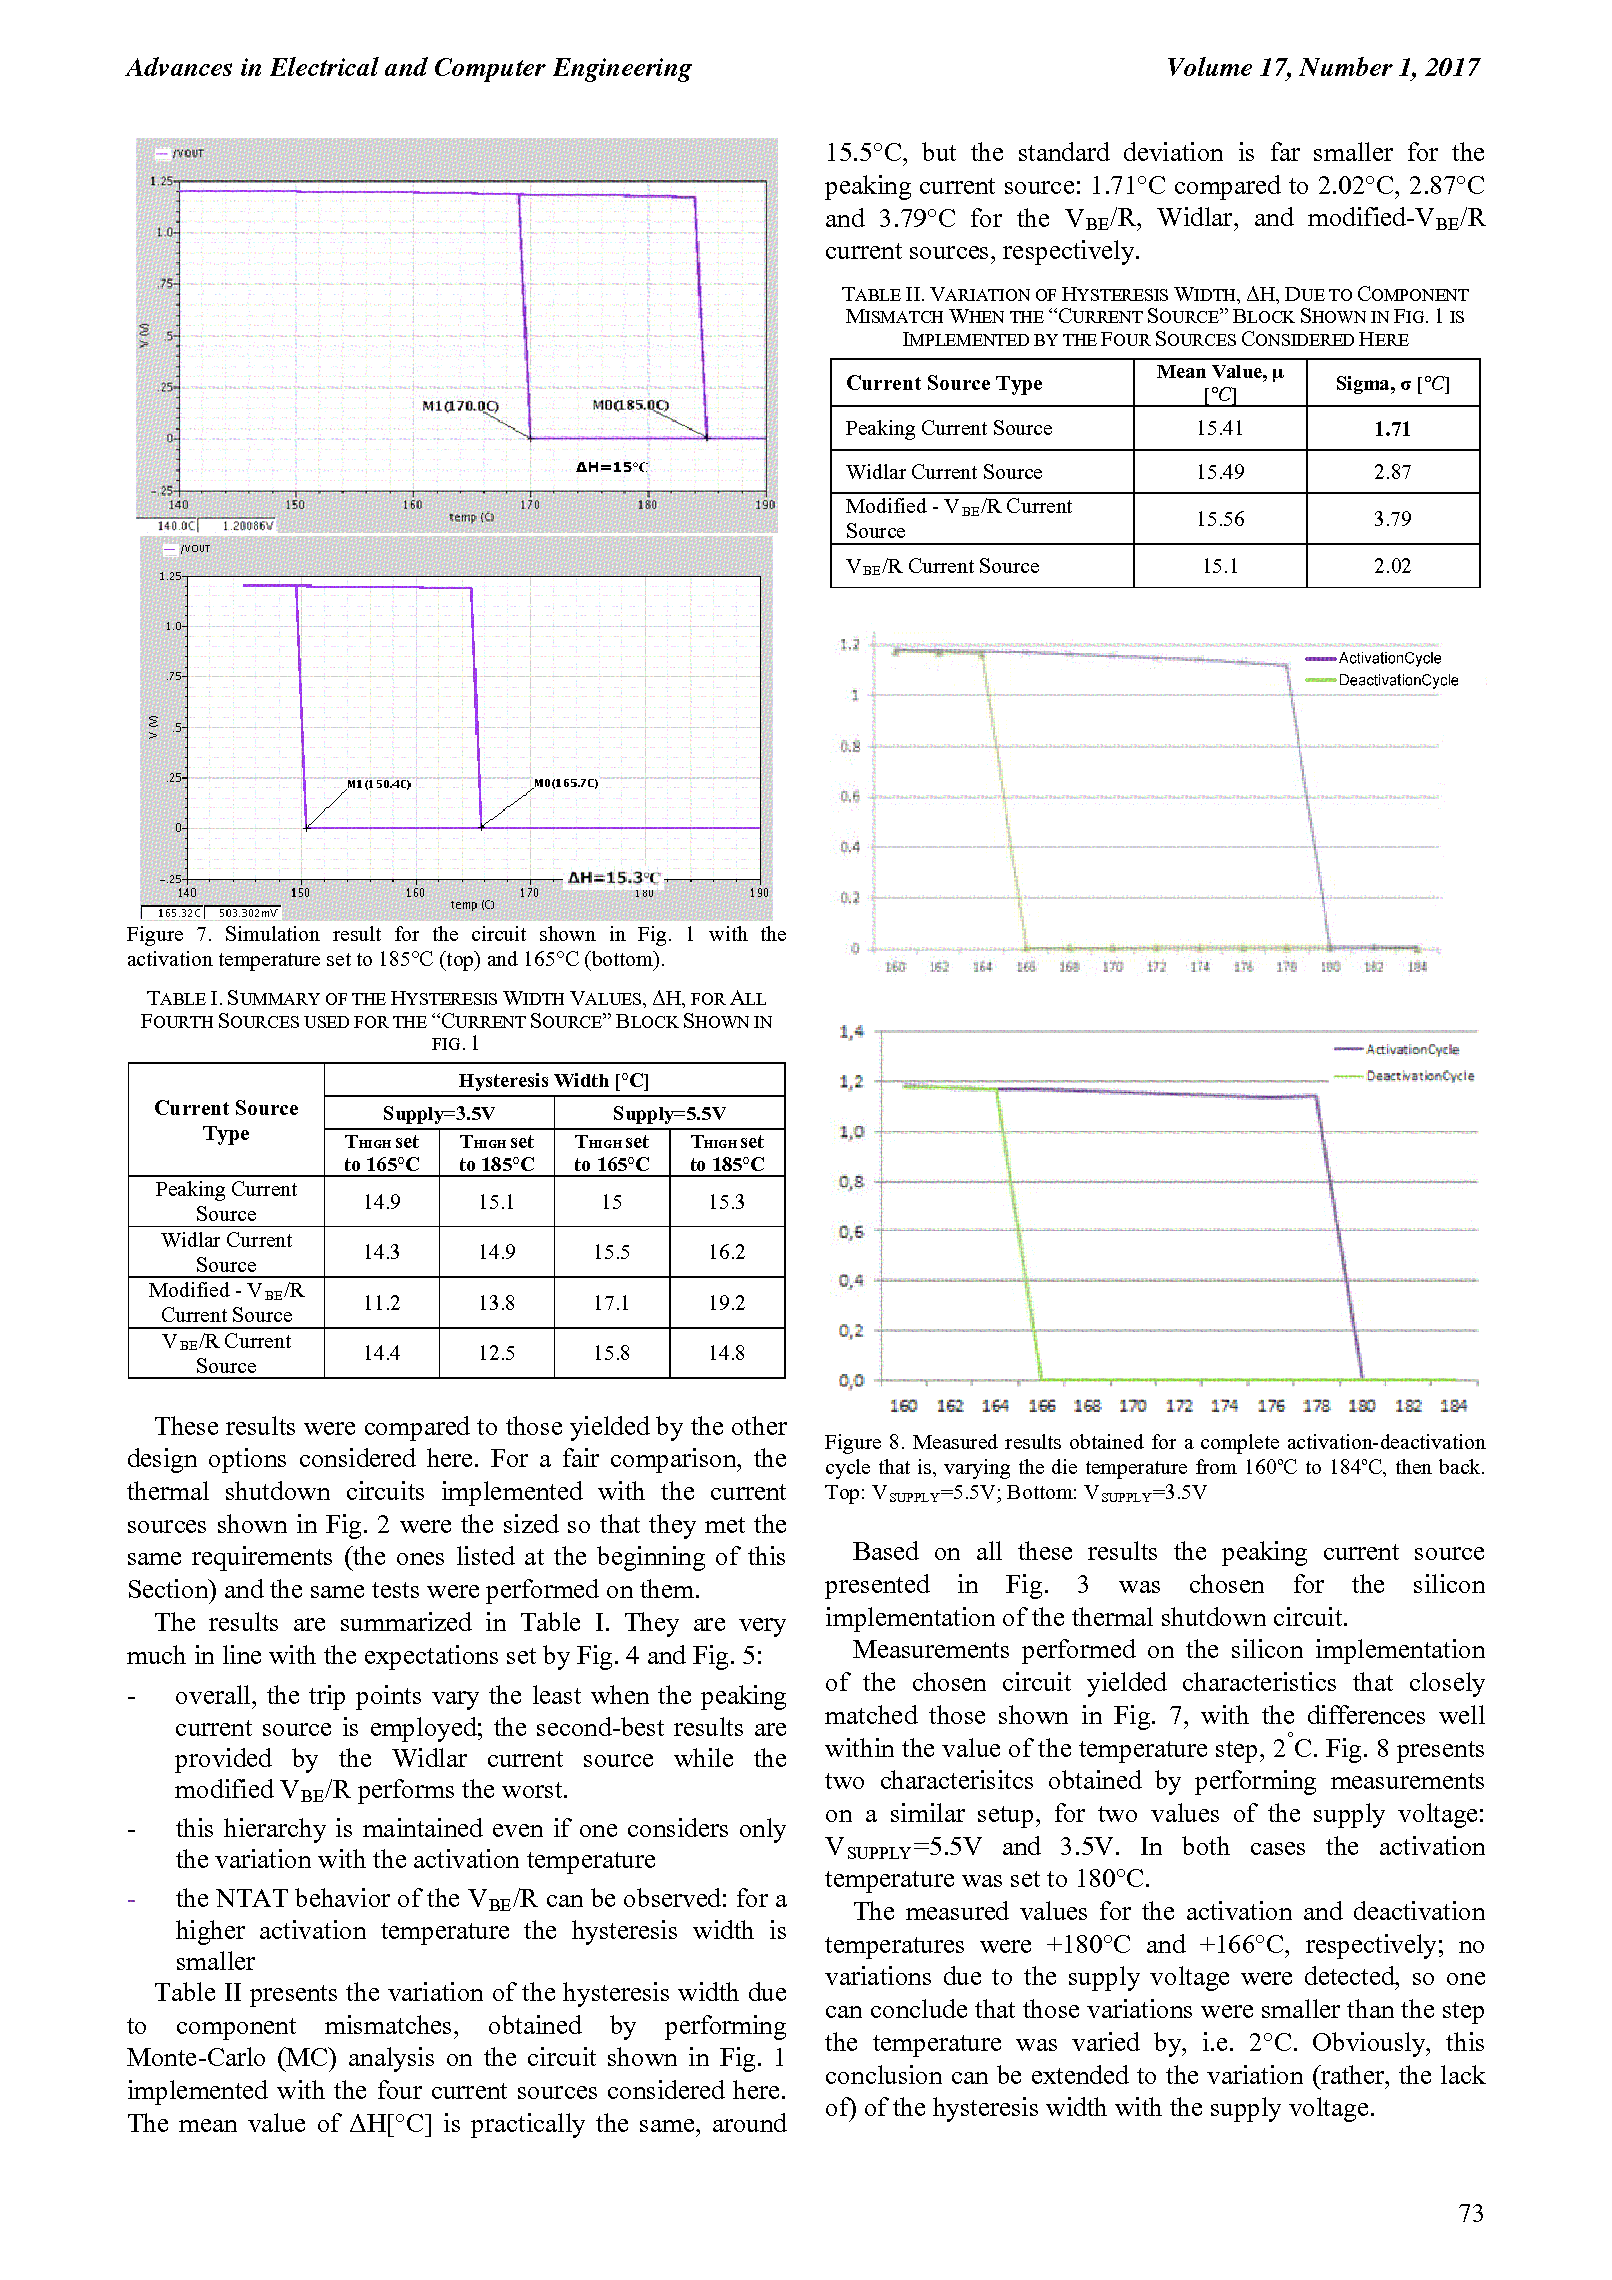 PDF Quickview for paper with DOI:10.4316/AECE.2017.01010